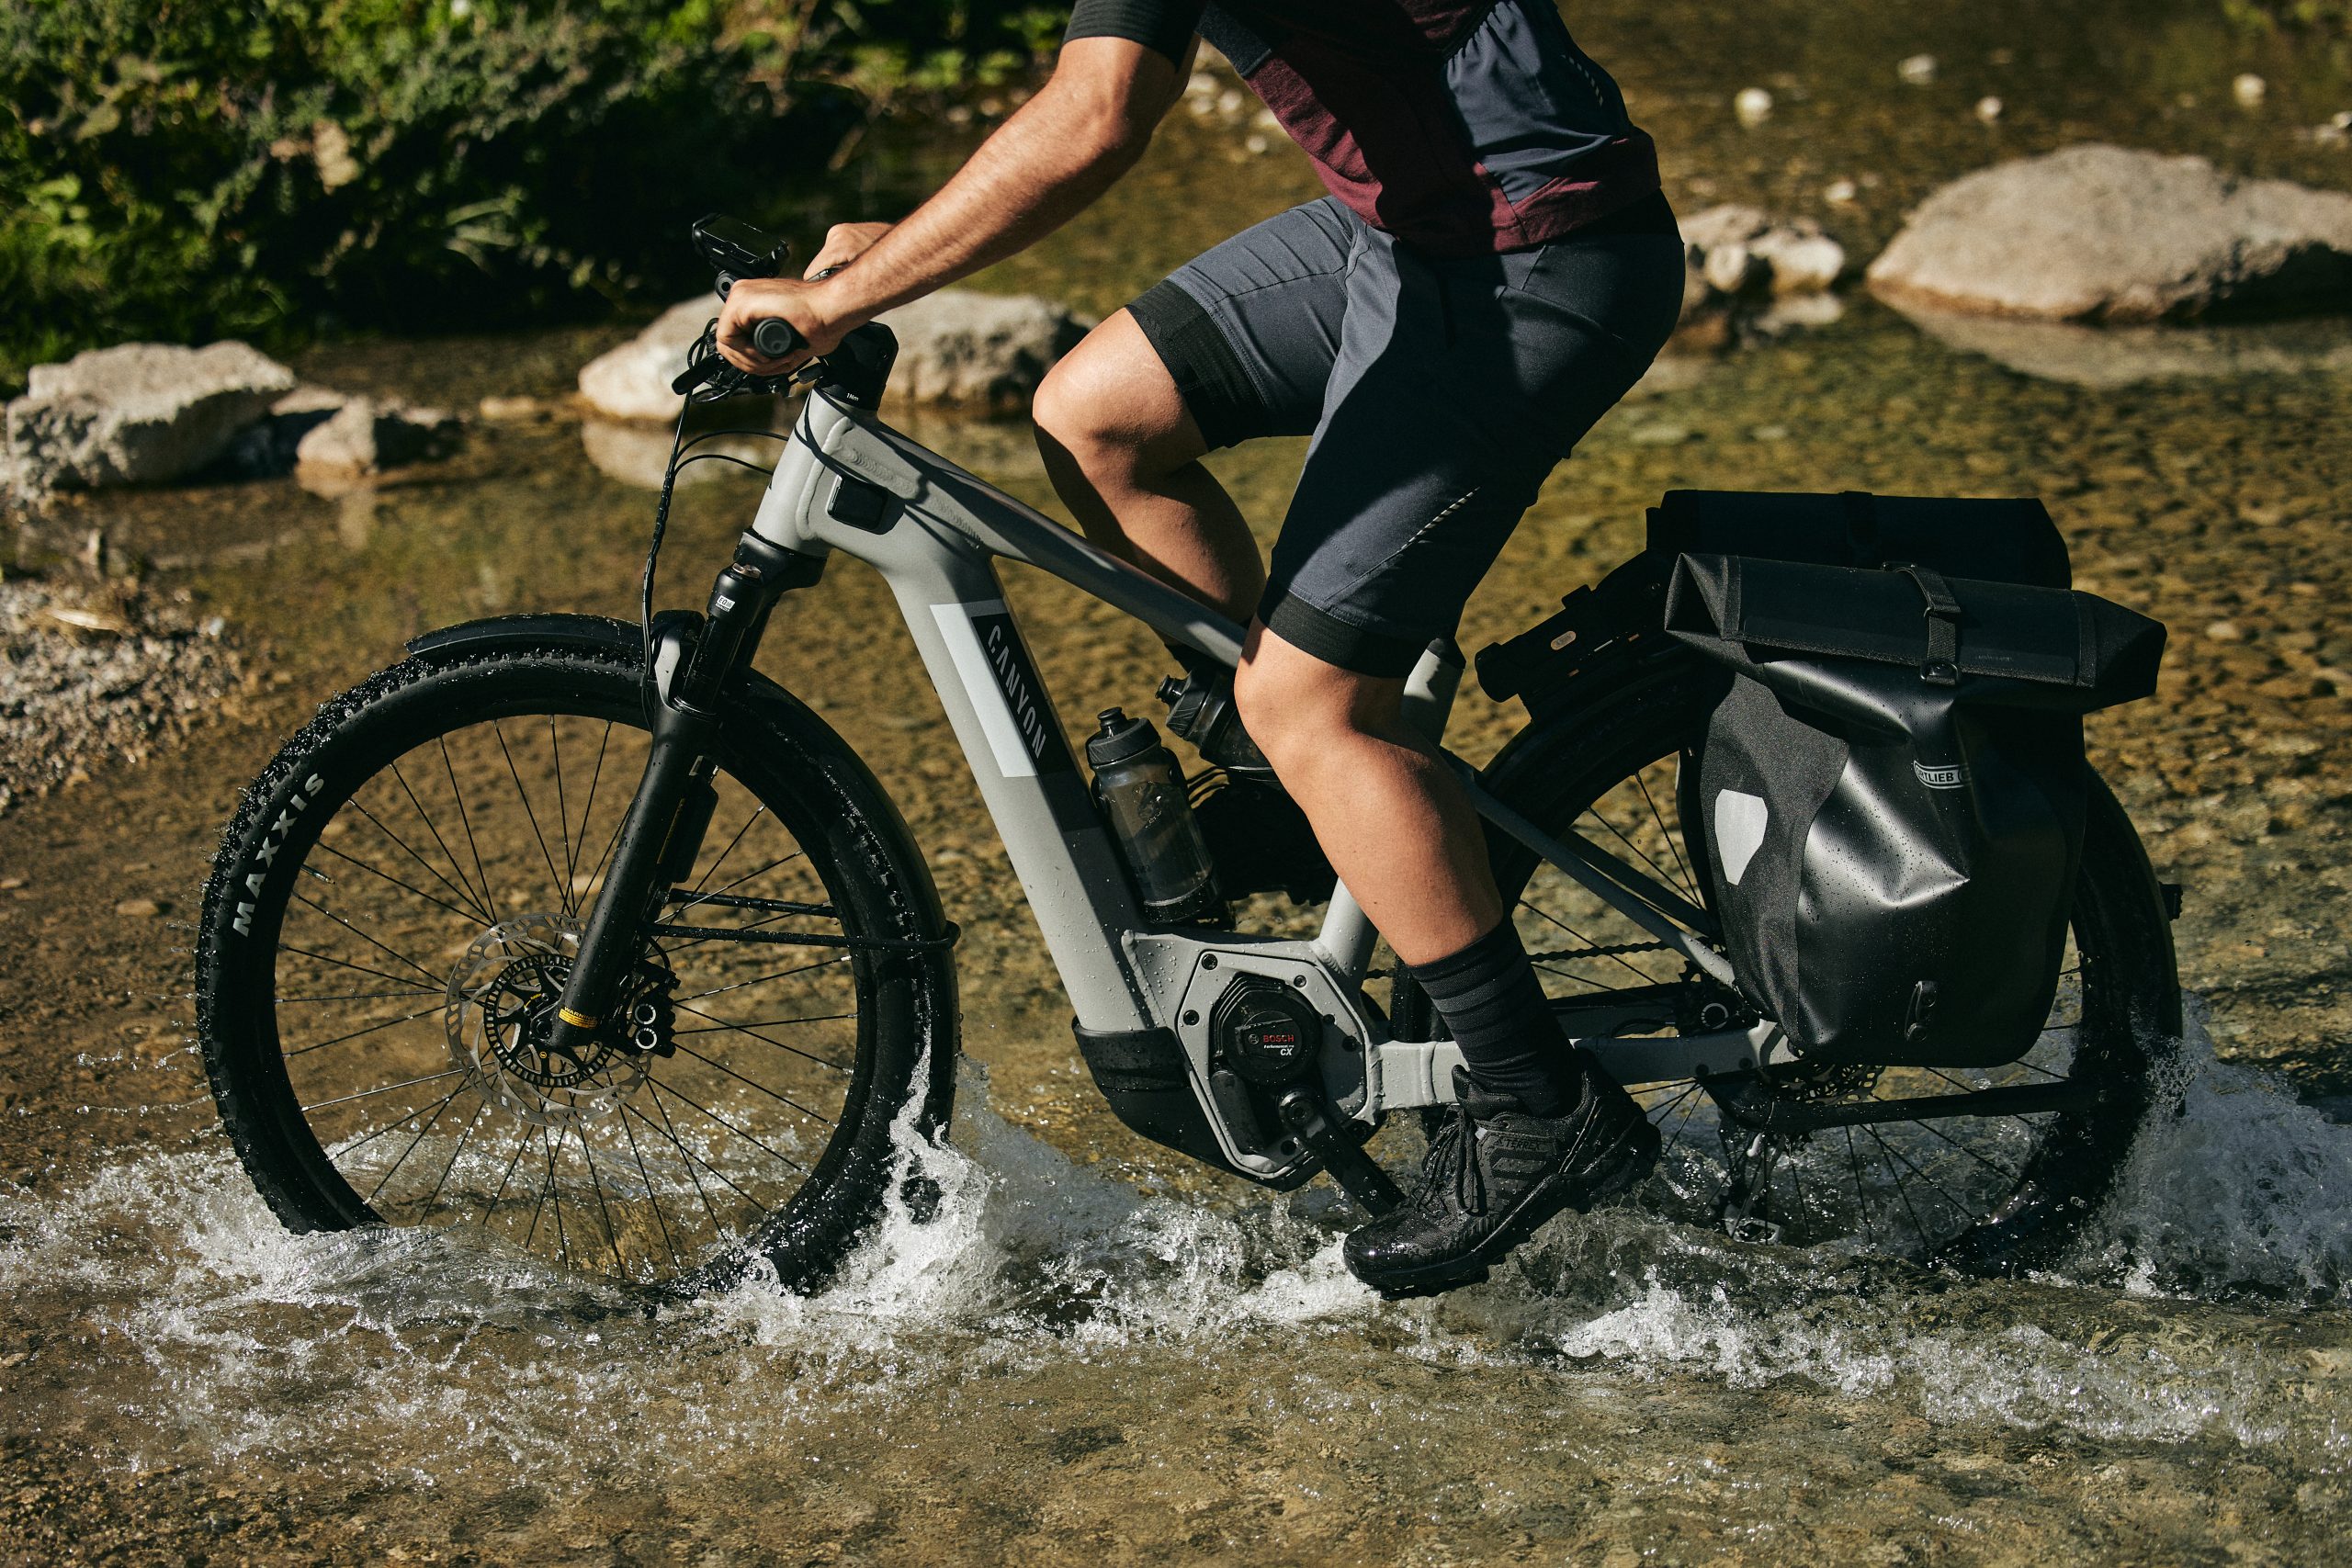 New Canyon e-bikes to consider this Spring